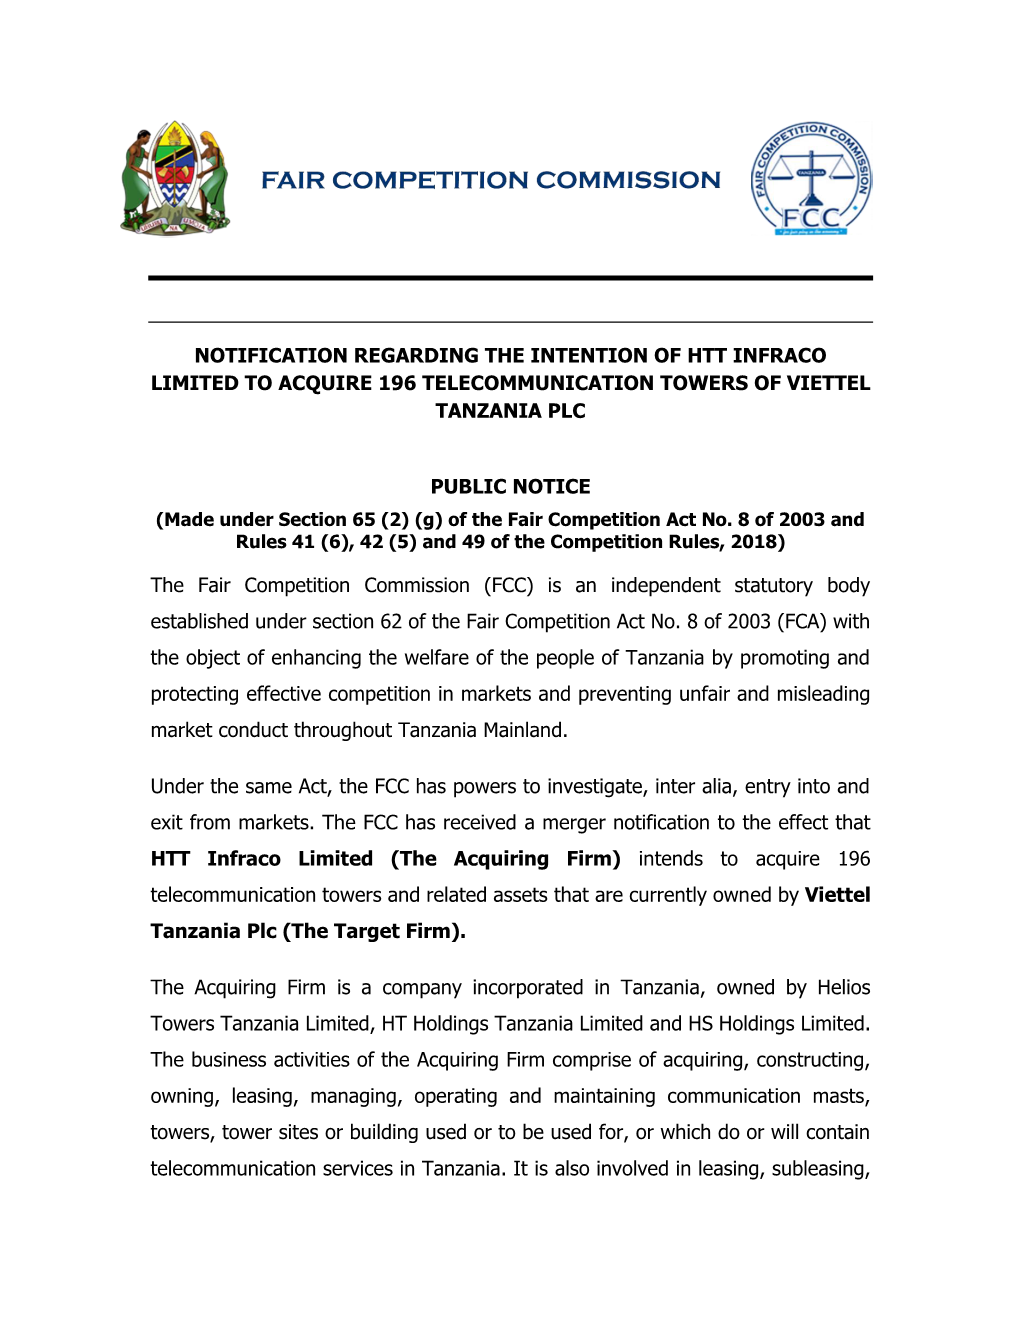 Notification Regarding the Intention of Htt Infraco Limited to Acquire 196 Telecommunication Towers of Viettel Tanzania Plc